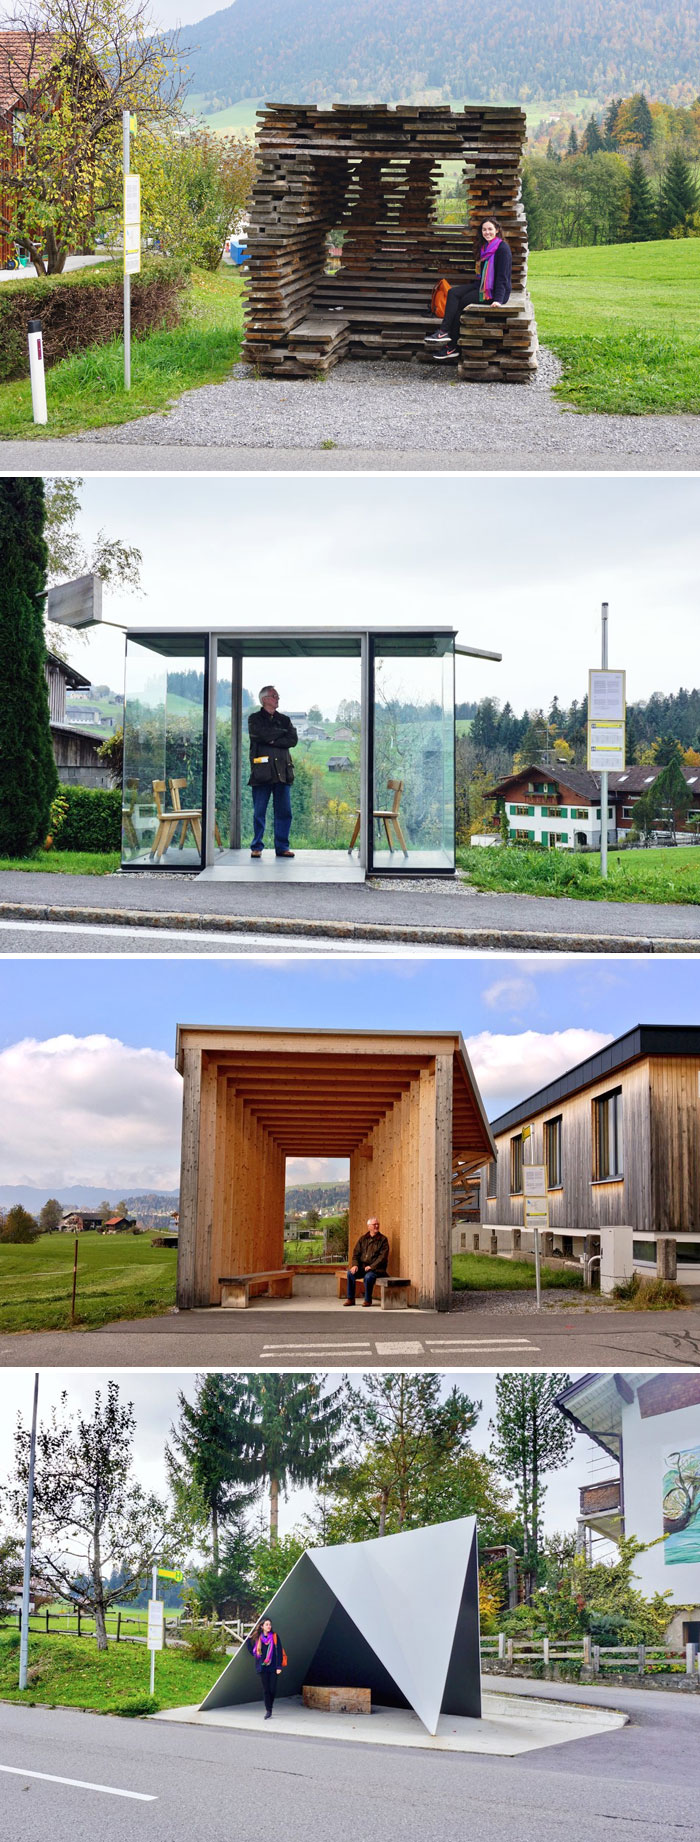 Architects From Seven Countries Designed Some Bus Stops In A Little Austrian Valley